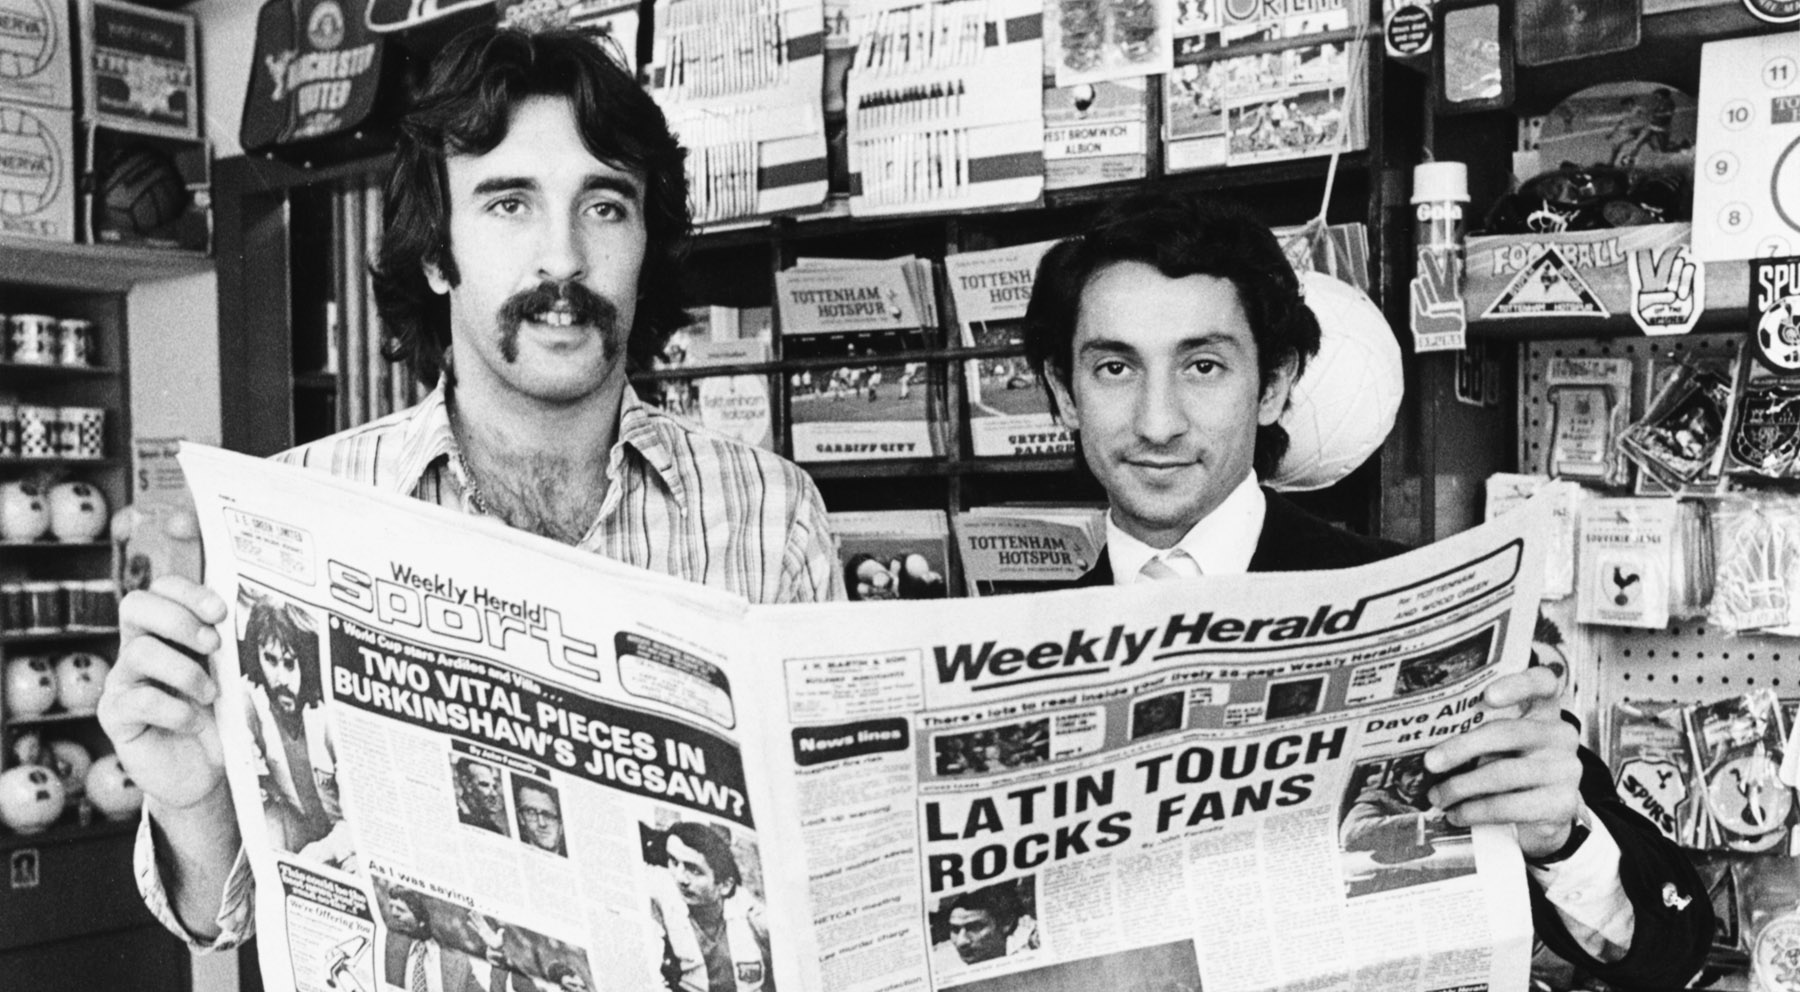 Argentinian Wotld Cup winning football players, Osvaldo Ardiles (right) and Ricardo Villa pose together with a local newspaper after signing for Tottenham Hotspur Football Club, White Hart Lane, London, August 1st 1978. (Photo by Tommy Hindley/Professional Sport/Popperfoto/Getty Images)